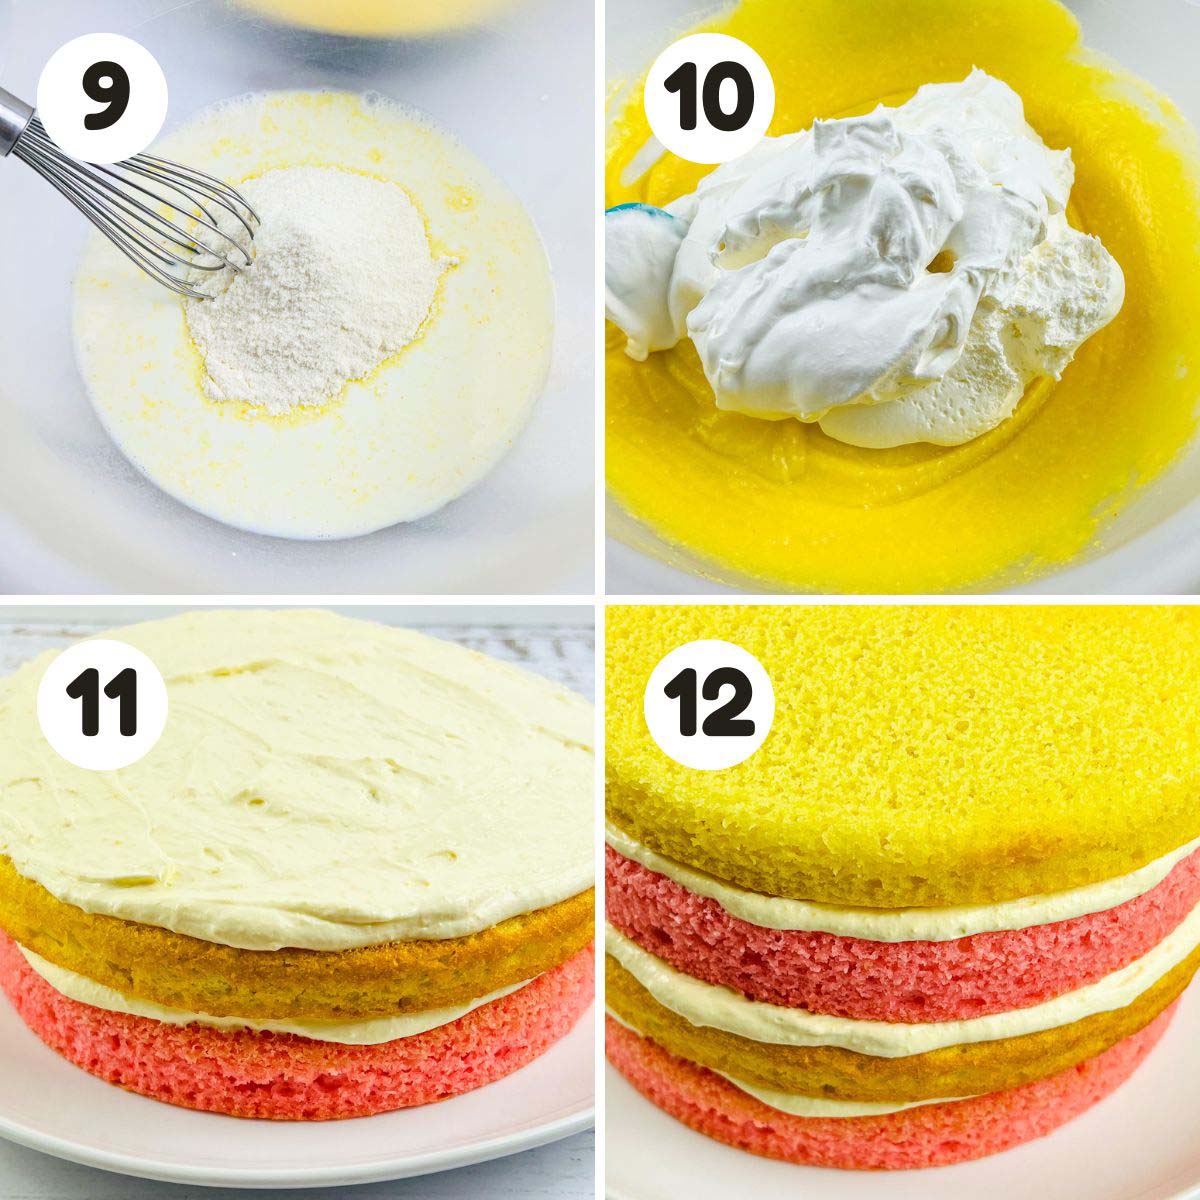 Steps to assemble the cake.